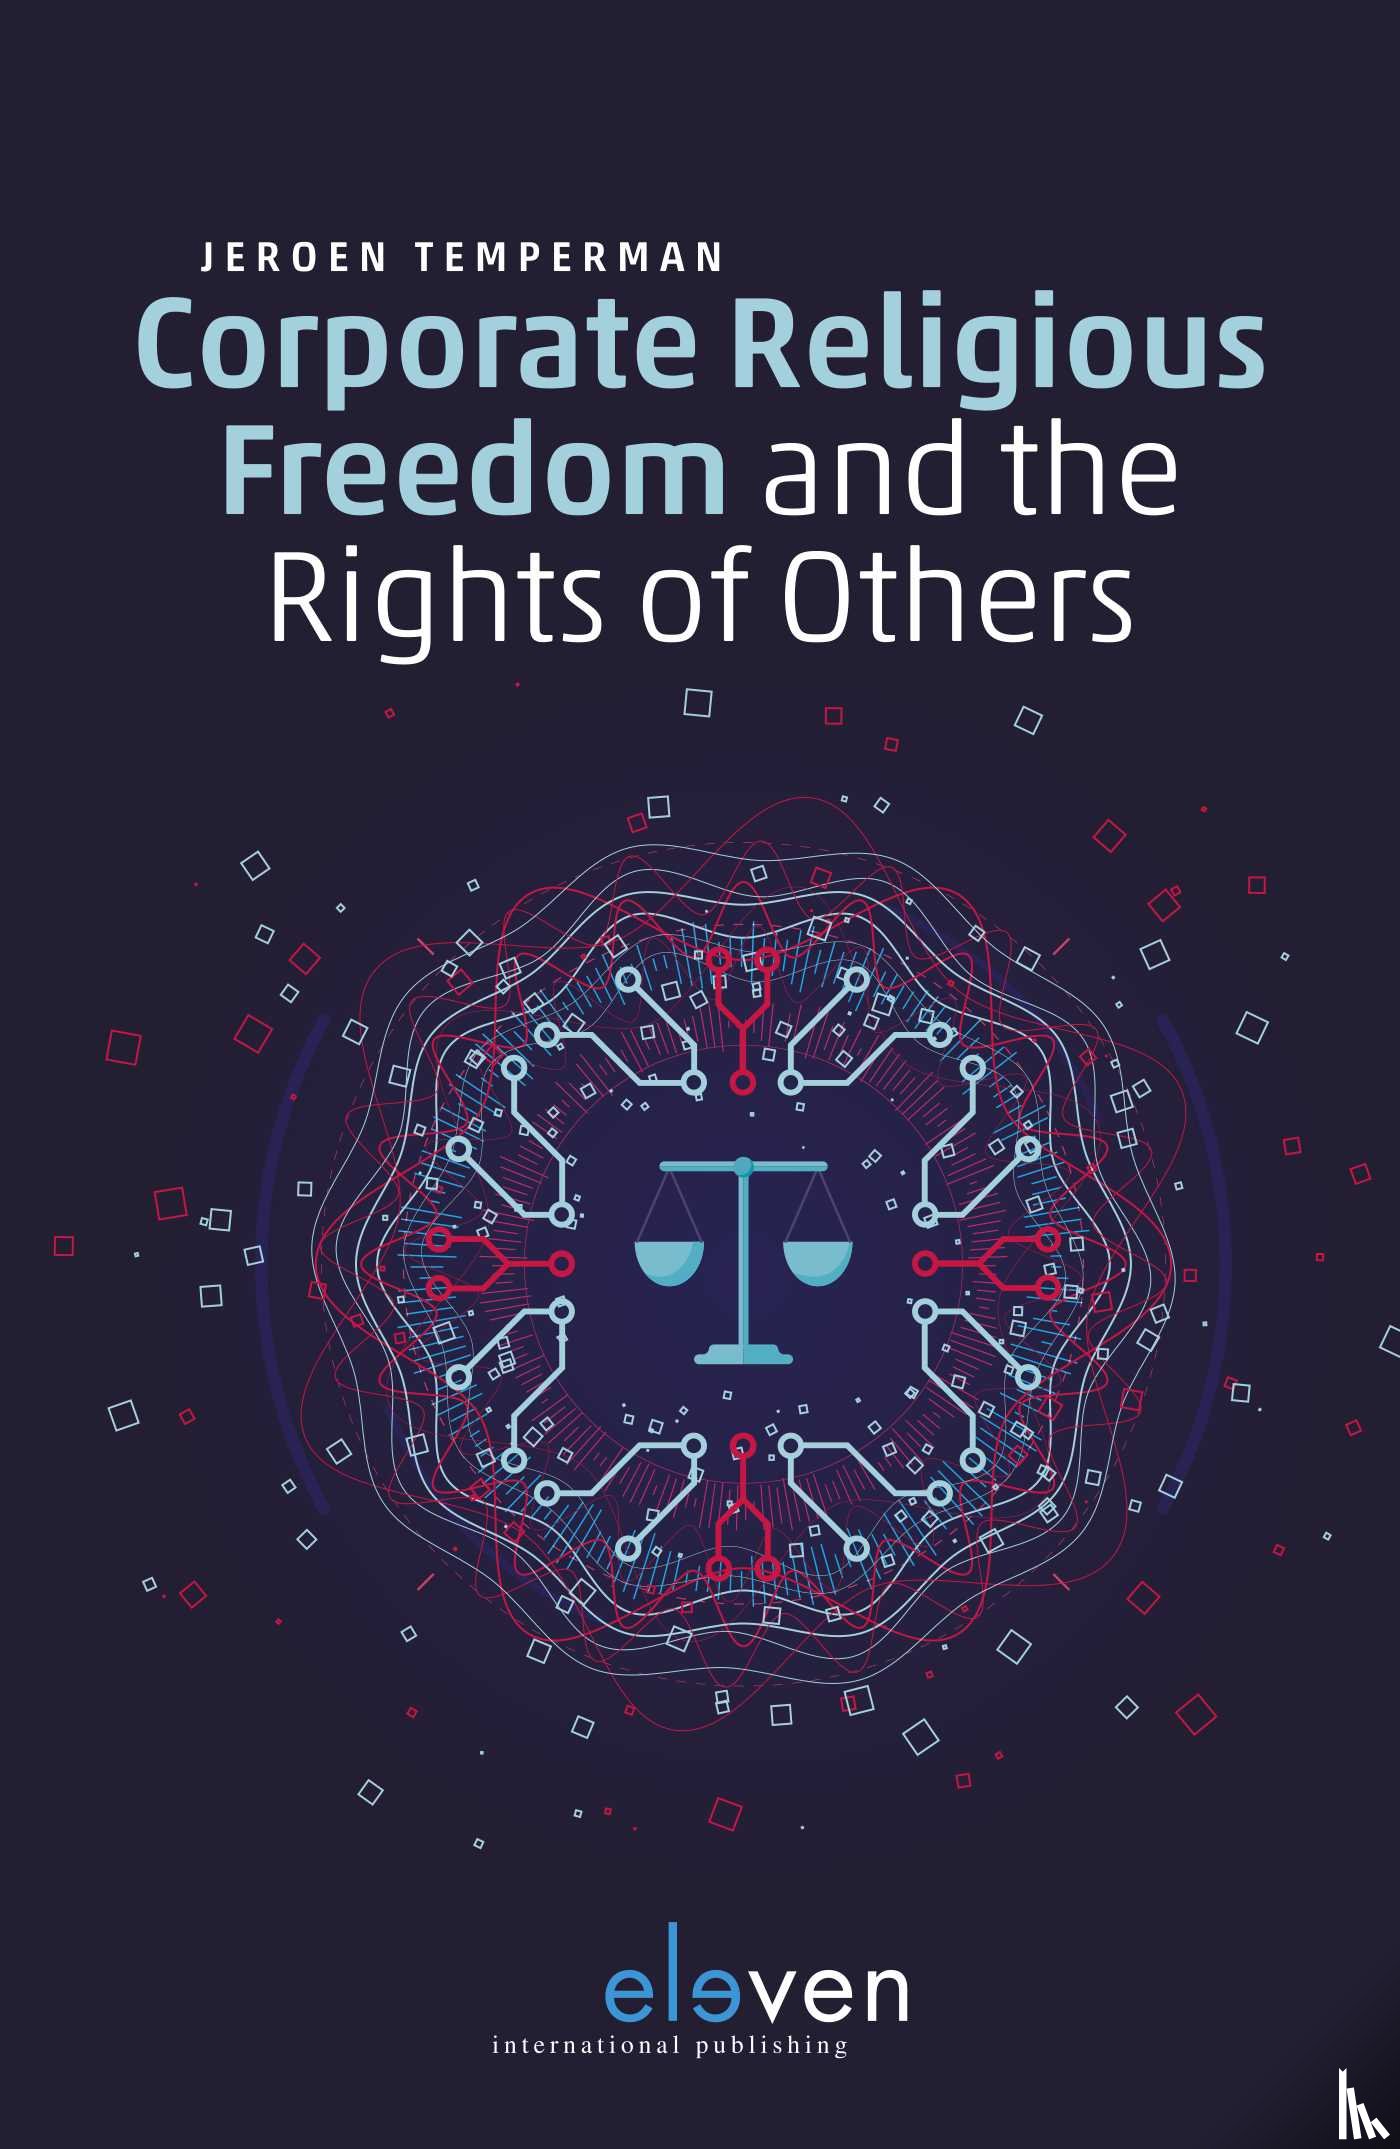 Temperman, Jeroen - Corporate Religious Freedom and the Rights of Others